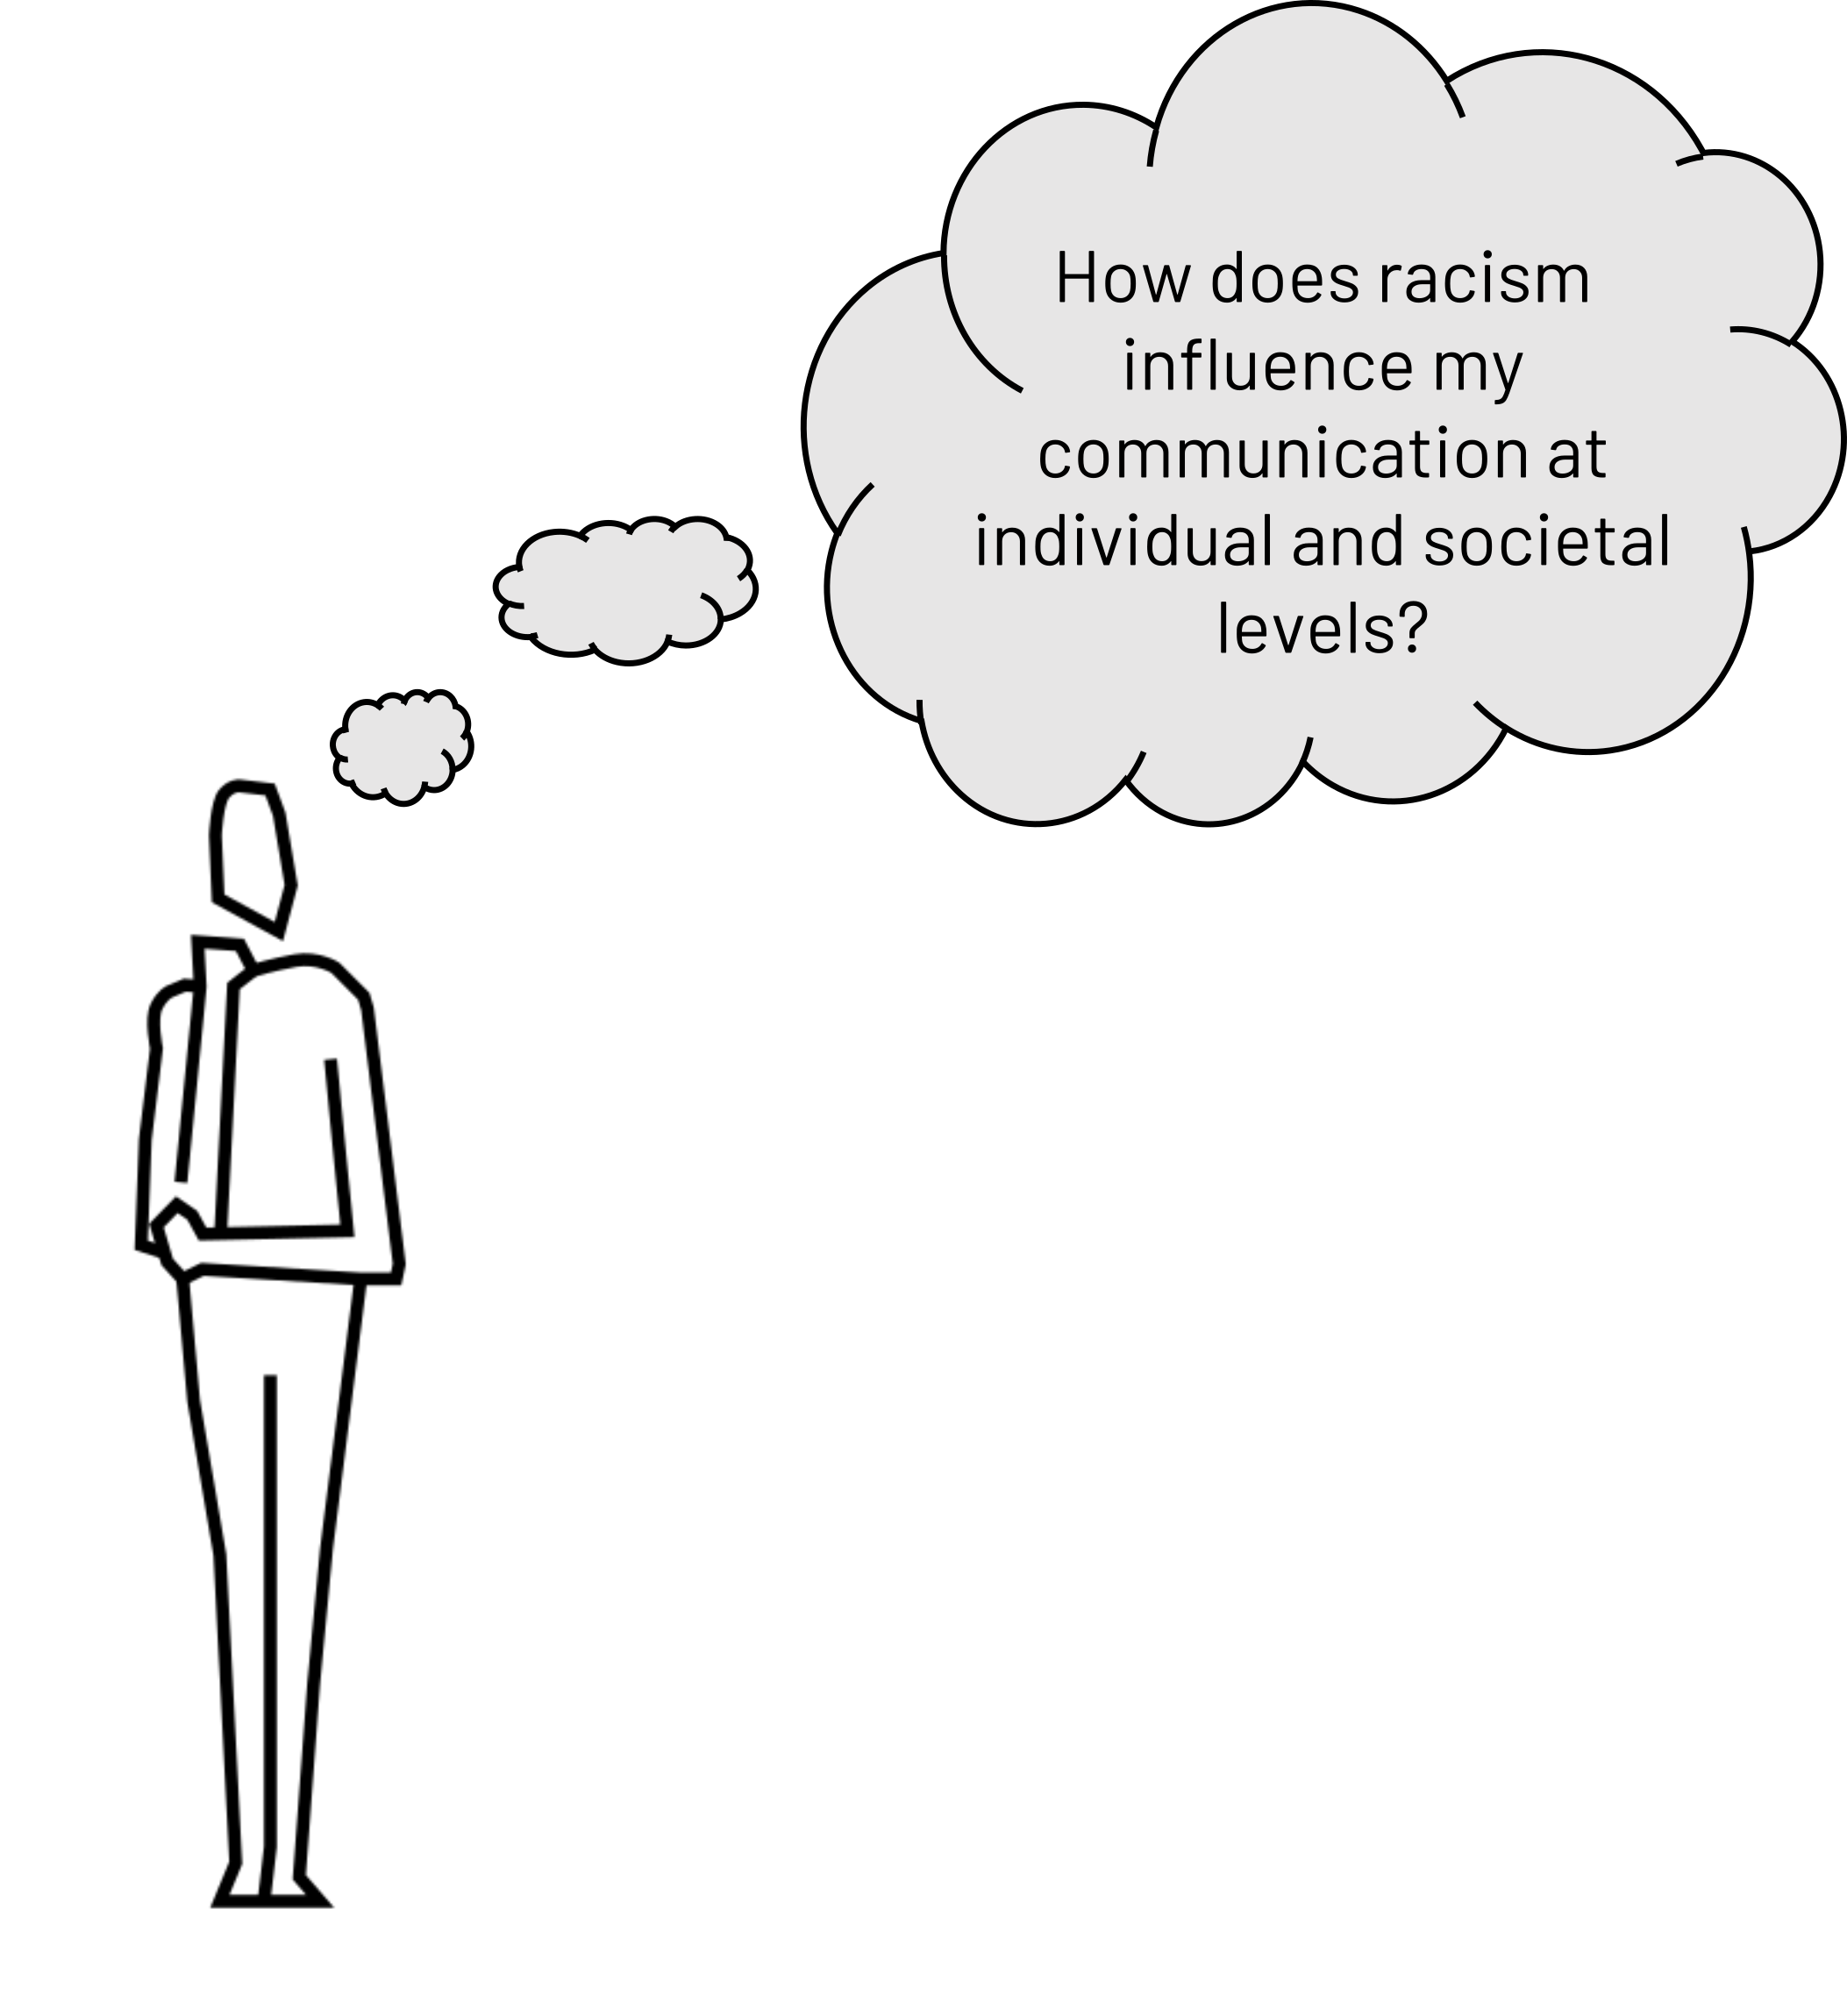 Outline of a person with thought bubbles: How does racism influence my communication at individual and societal levels?